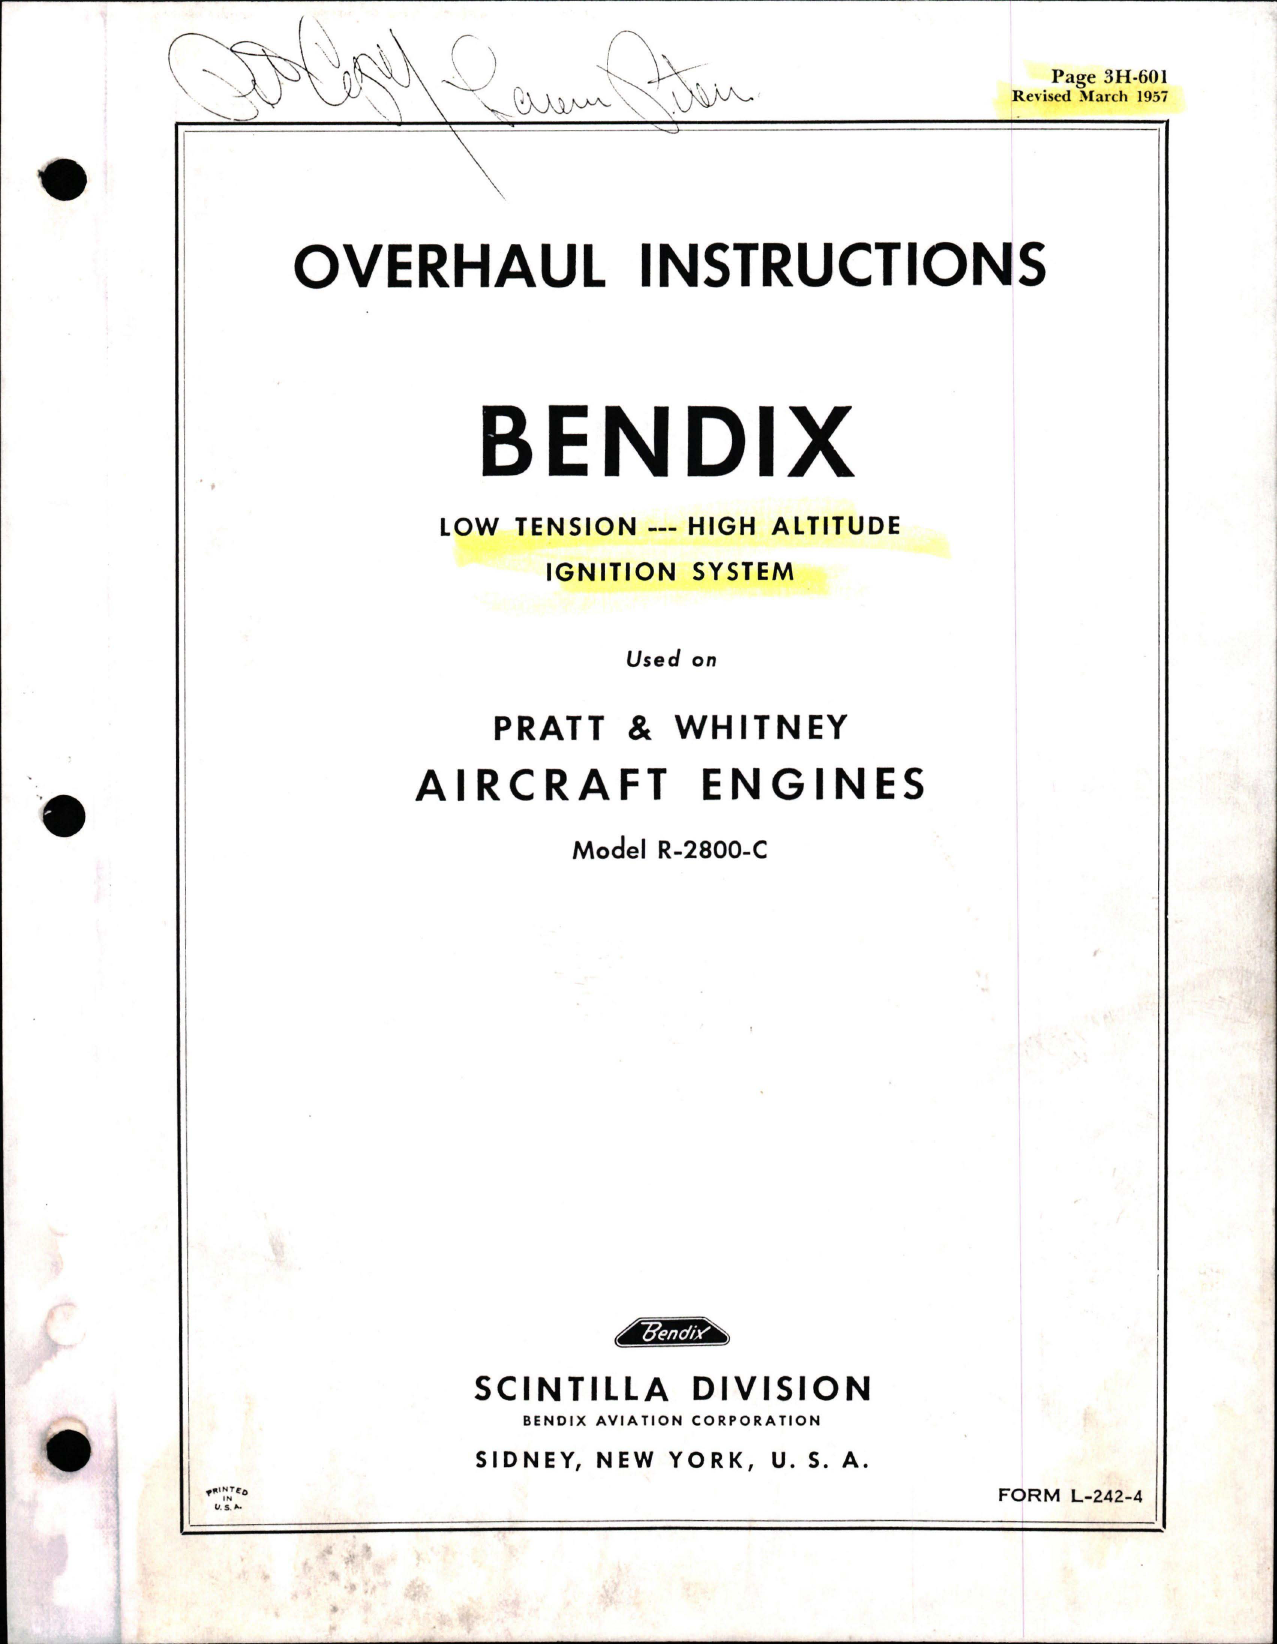 Sample page 1 from AirCorps Library document: Overhaul Instructions for Low Tension - High Altitude Ignition System